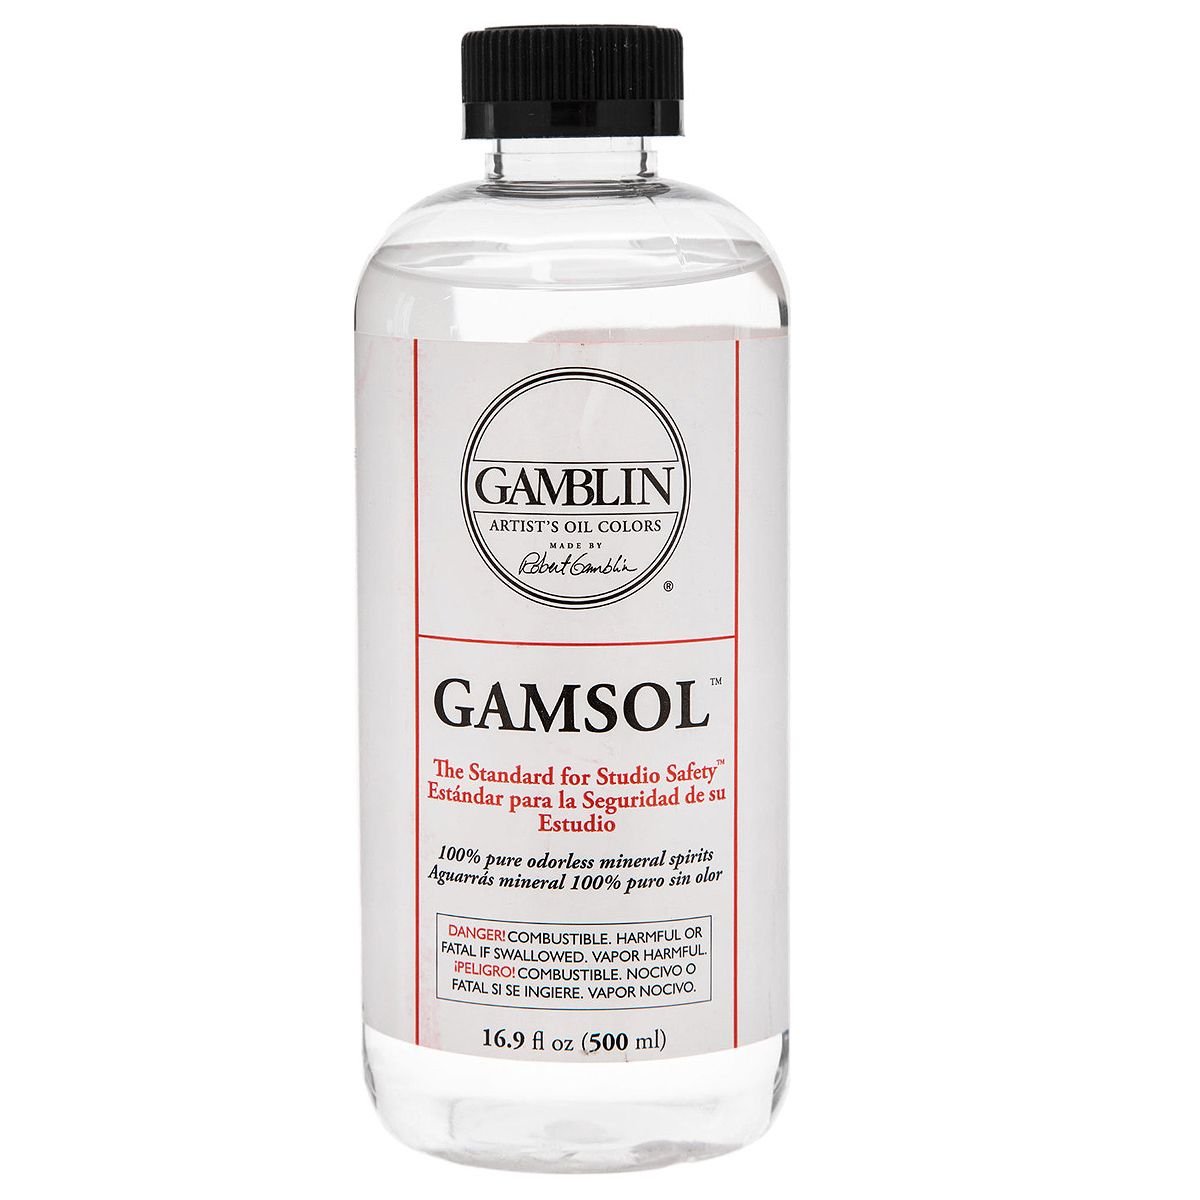 Gamsol Odorless Mineral Spirits Gallon (128oz) - Art and Frame of